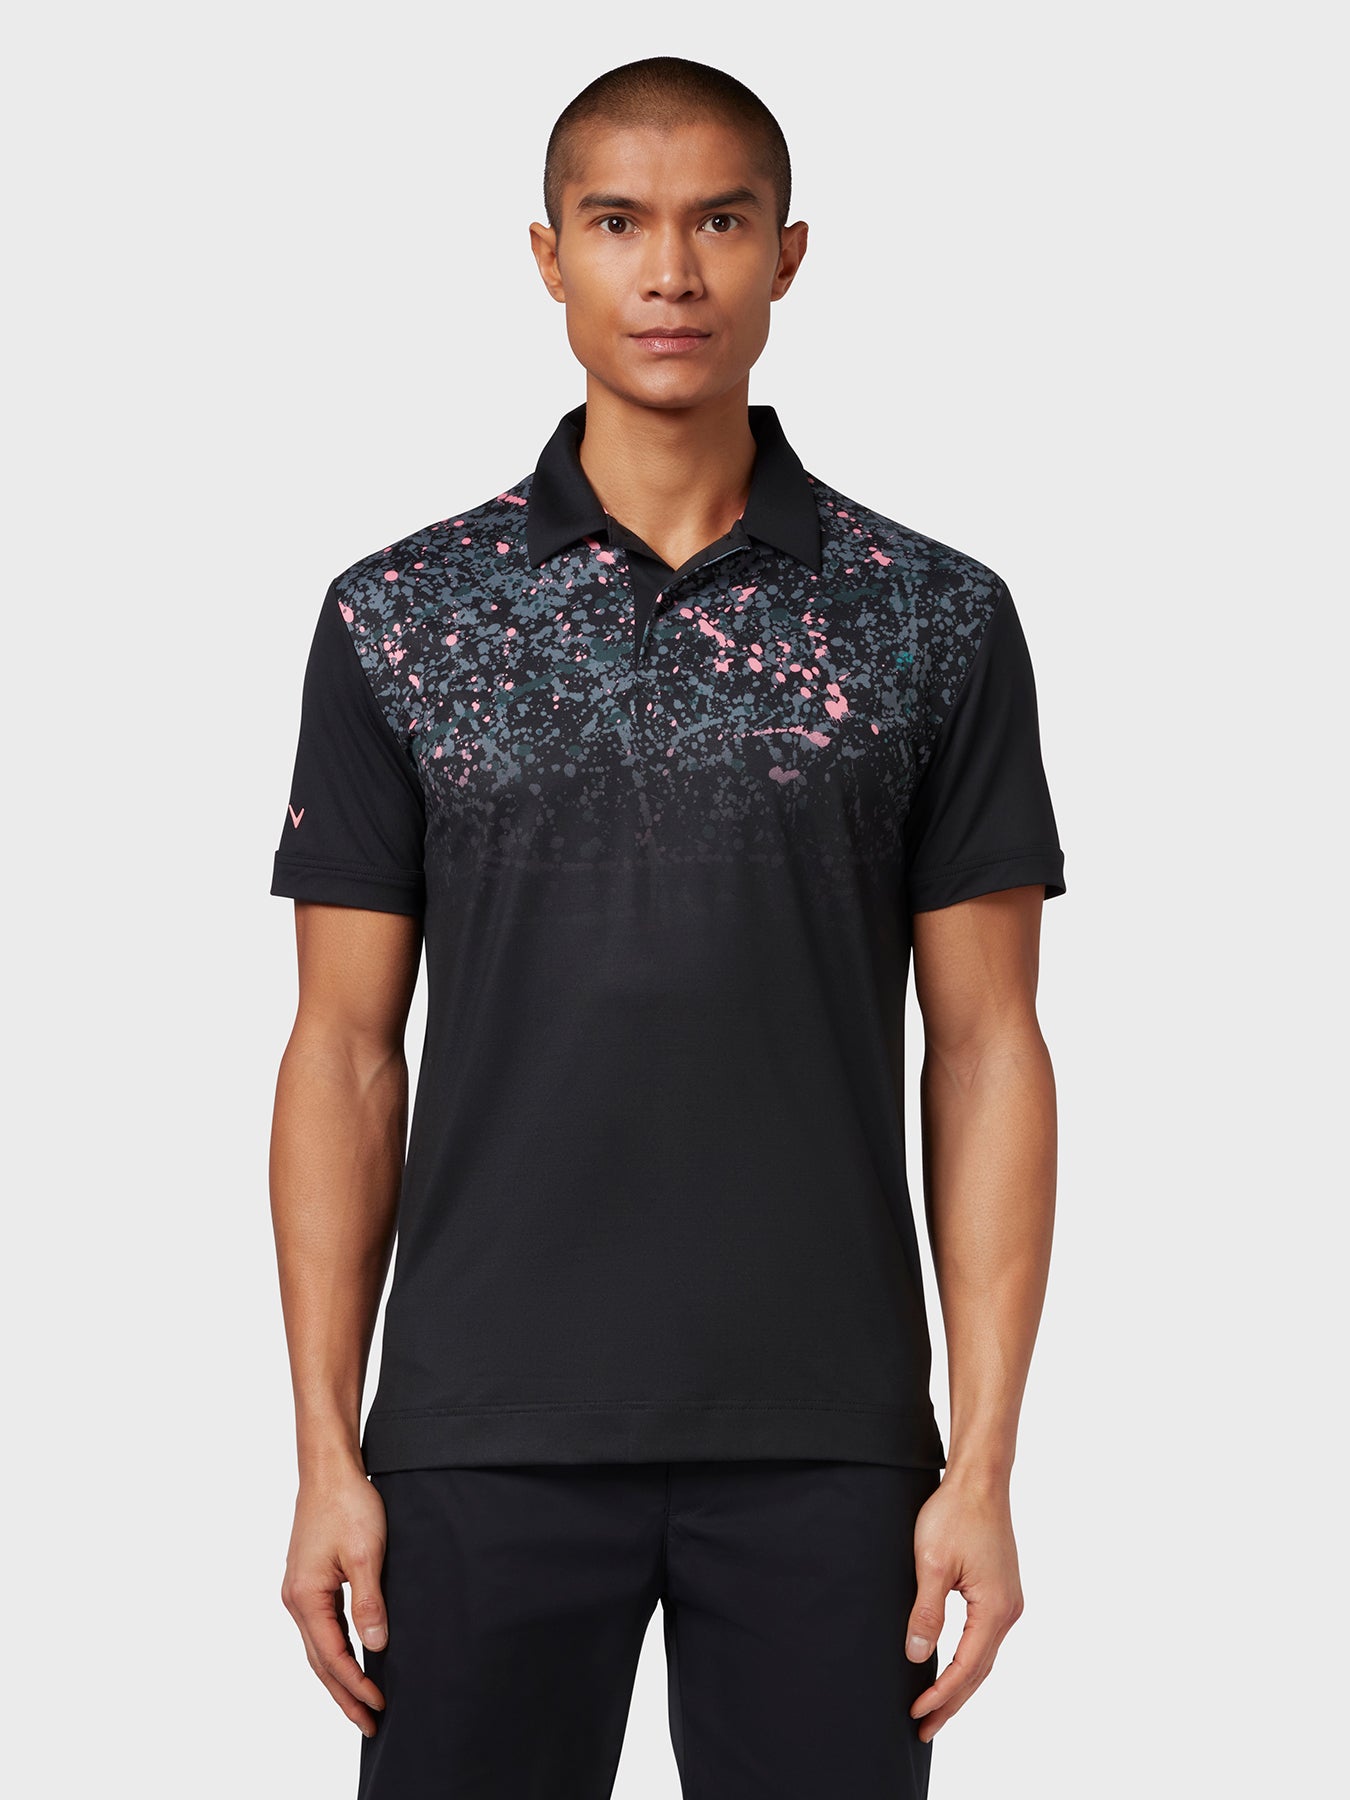 View X Series Splatter Paint Ombre Polo In Caviar Caviar XL information